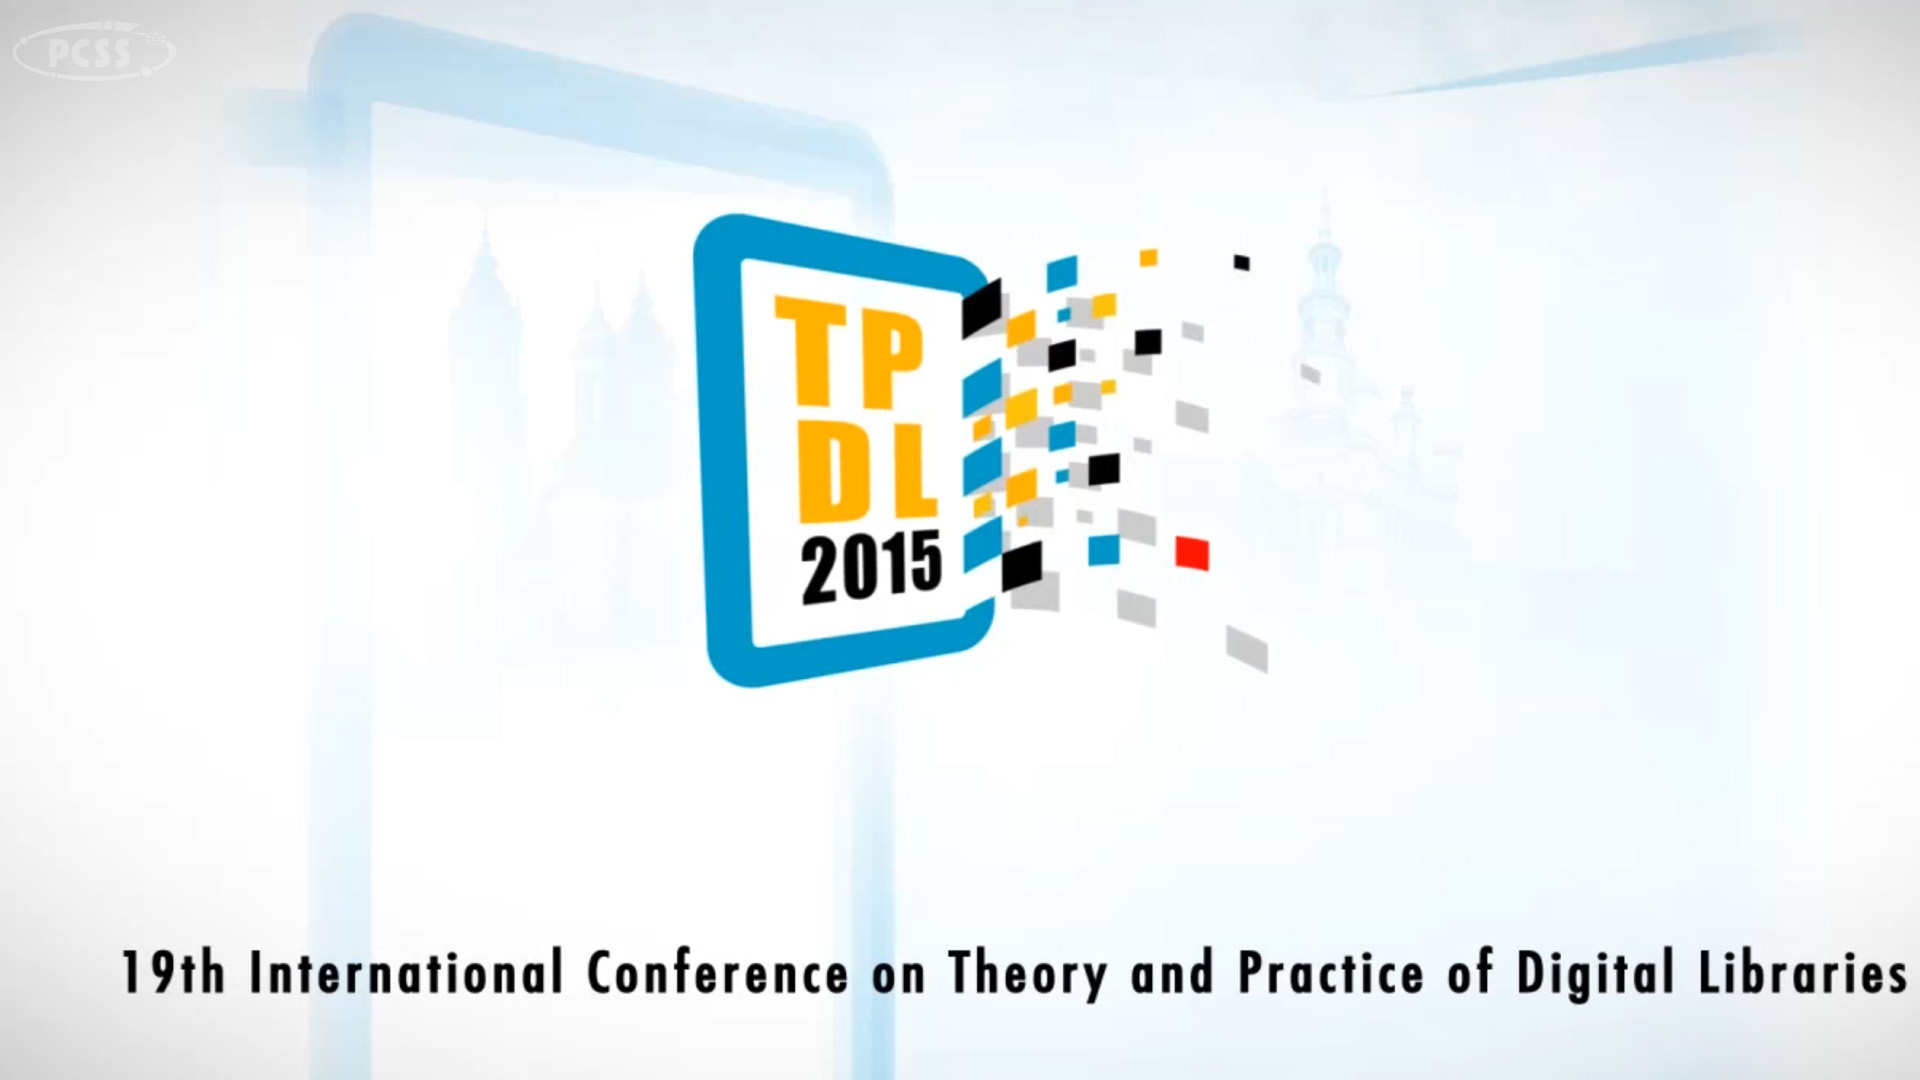 TPDL 2015 Conference – registration is now open!